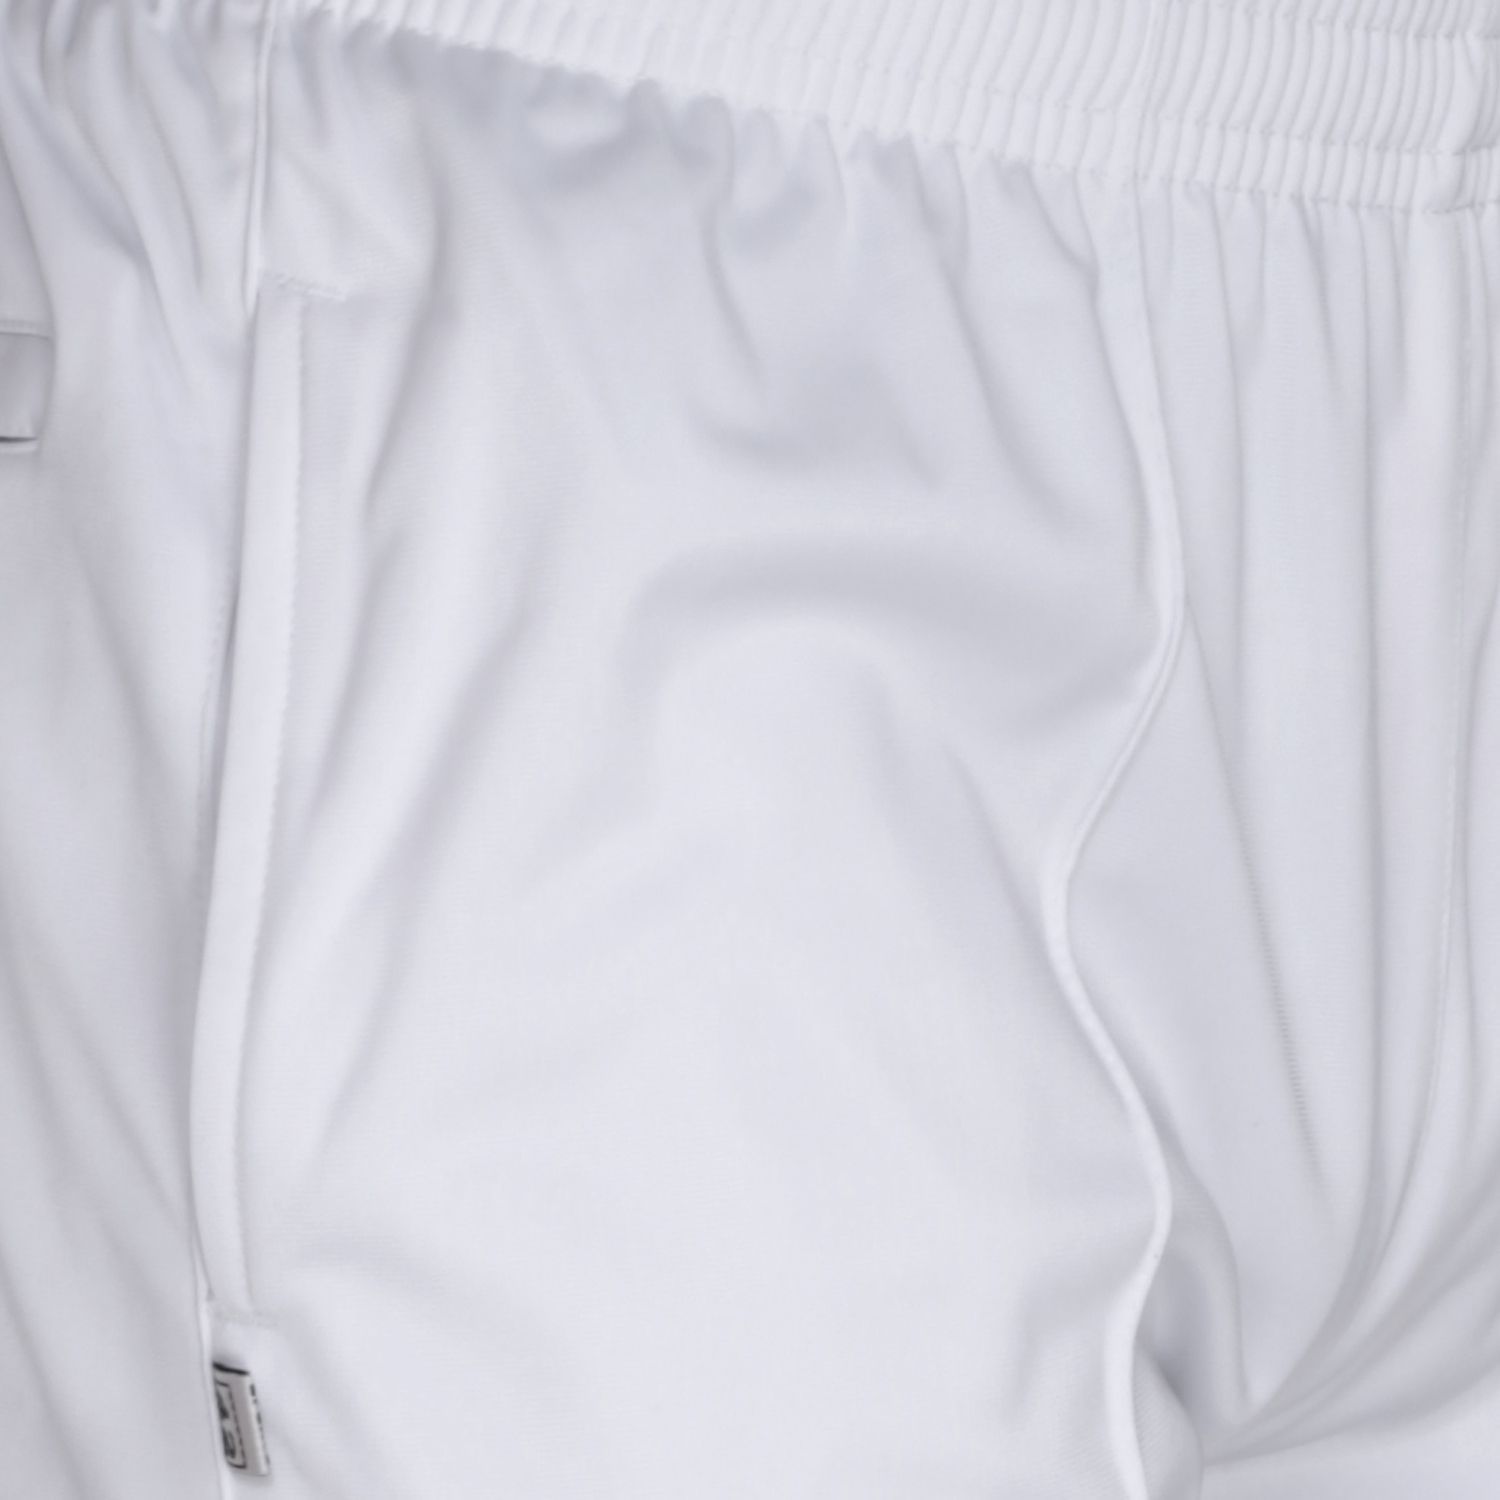 PEEPEE White Track Pants (Lower),Daily use and Sporting Activities ...